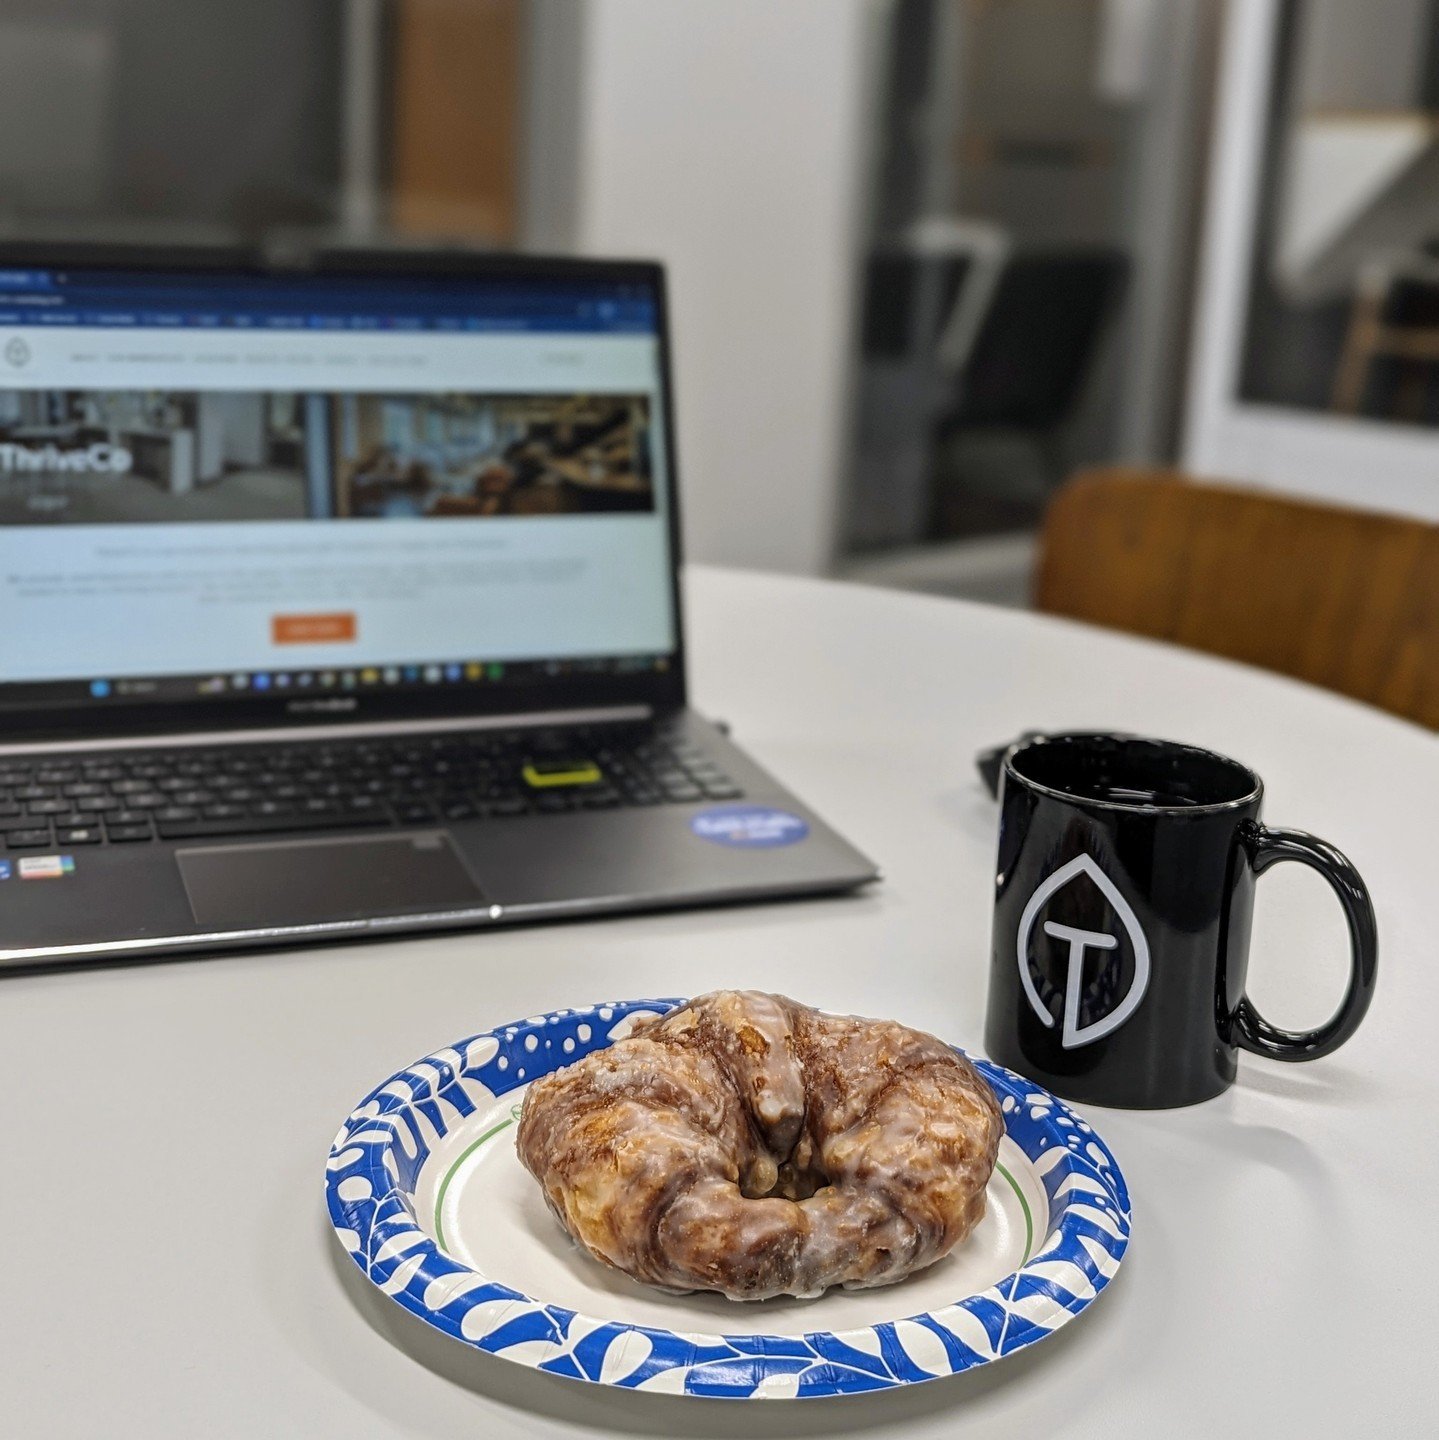 Nothing says #MondayMotivation quite like a donut. Thank you, @straubsmarket, for powering our members&rsquo; Monday!
.
.
.
.
.
#memberperks #stldonuts #straubsdonut #donutday #mondaymood #membertreat